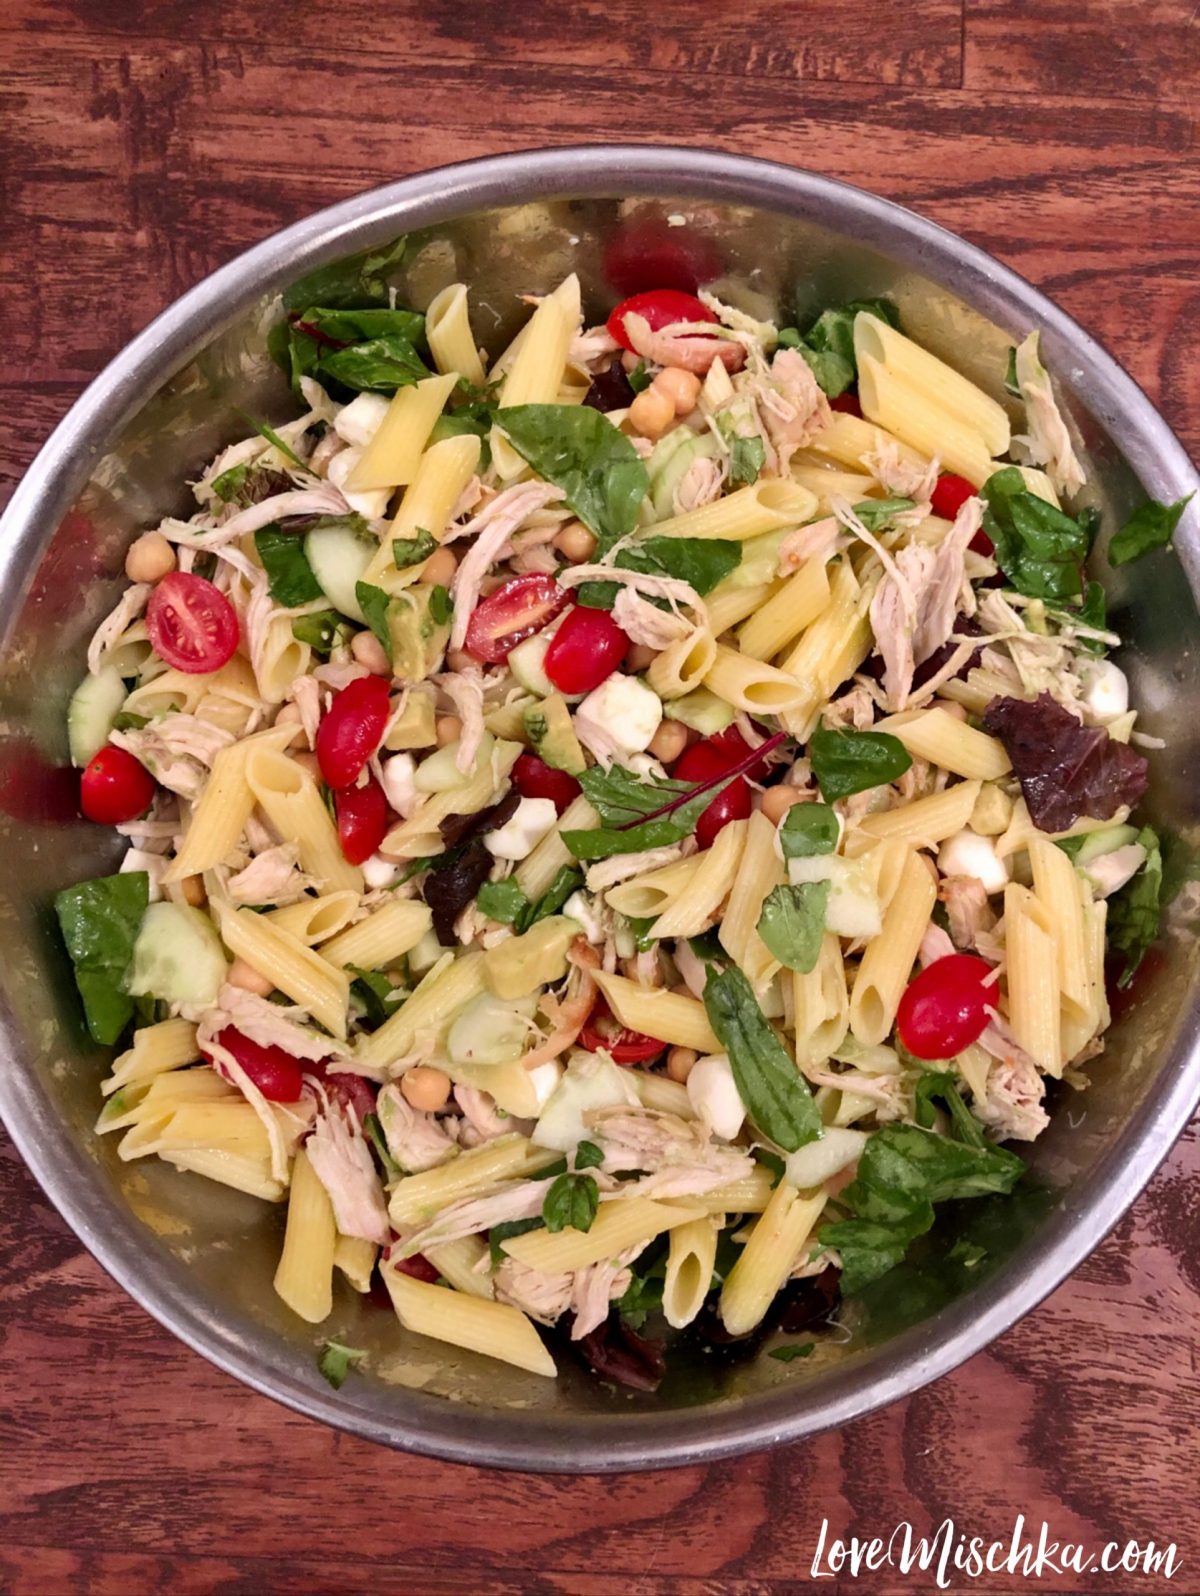 A big bowl of high protein pasta salad - chicken, mozzarella, chickpeas with pasta and veggies